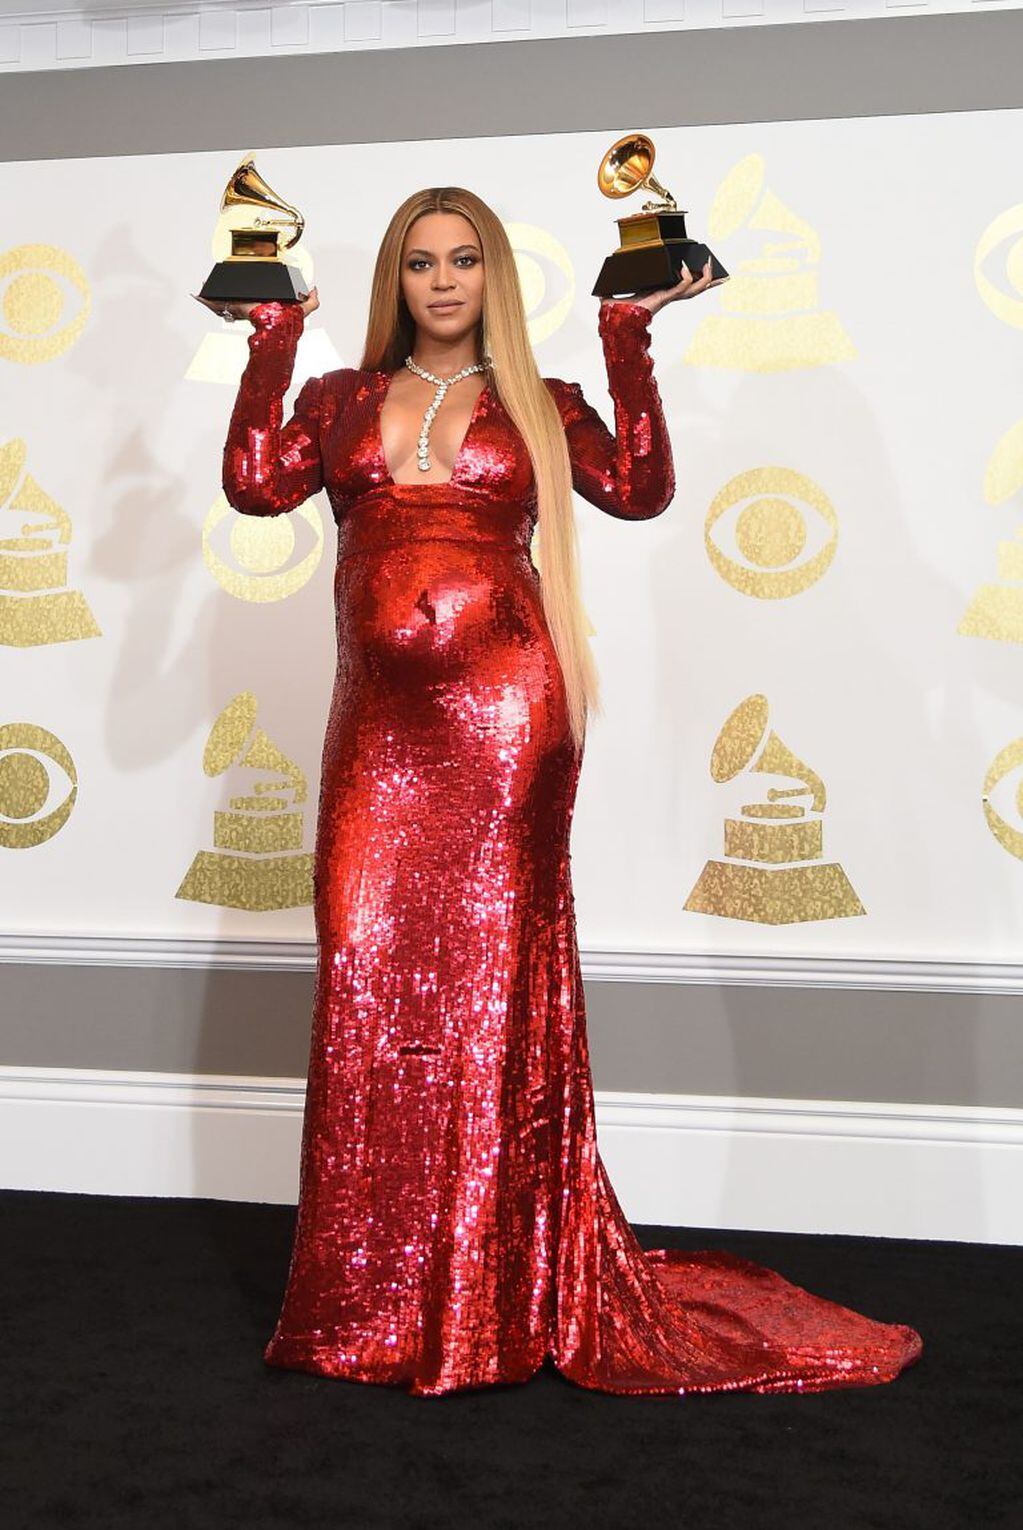 Singer Beyonce poses with her Grammy trophies in the press room during the 59th Annual Grammy music Awards on February 12, 2017, in Los Angeles, California.  / AFP PHOTO / Robyn BECK